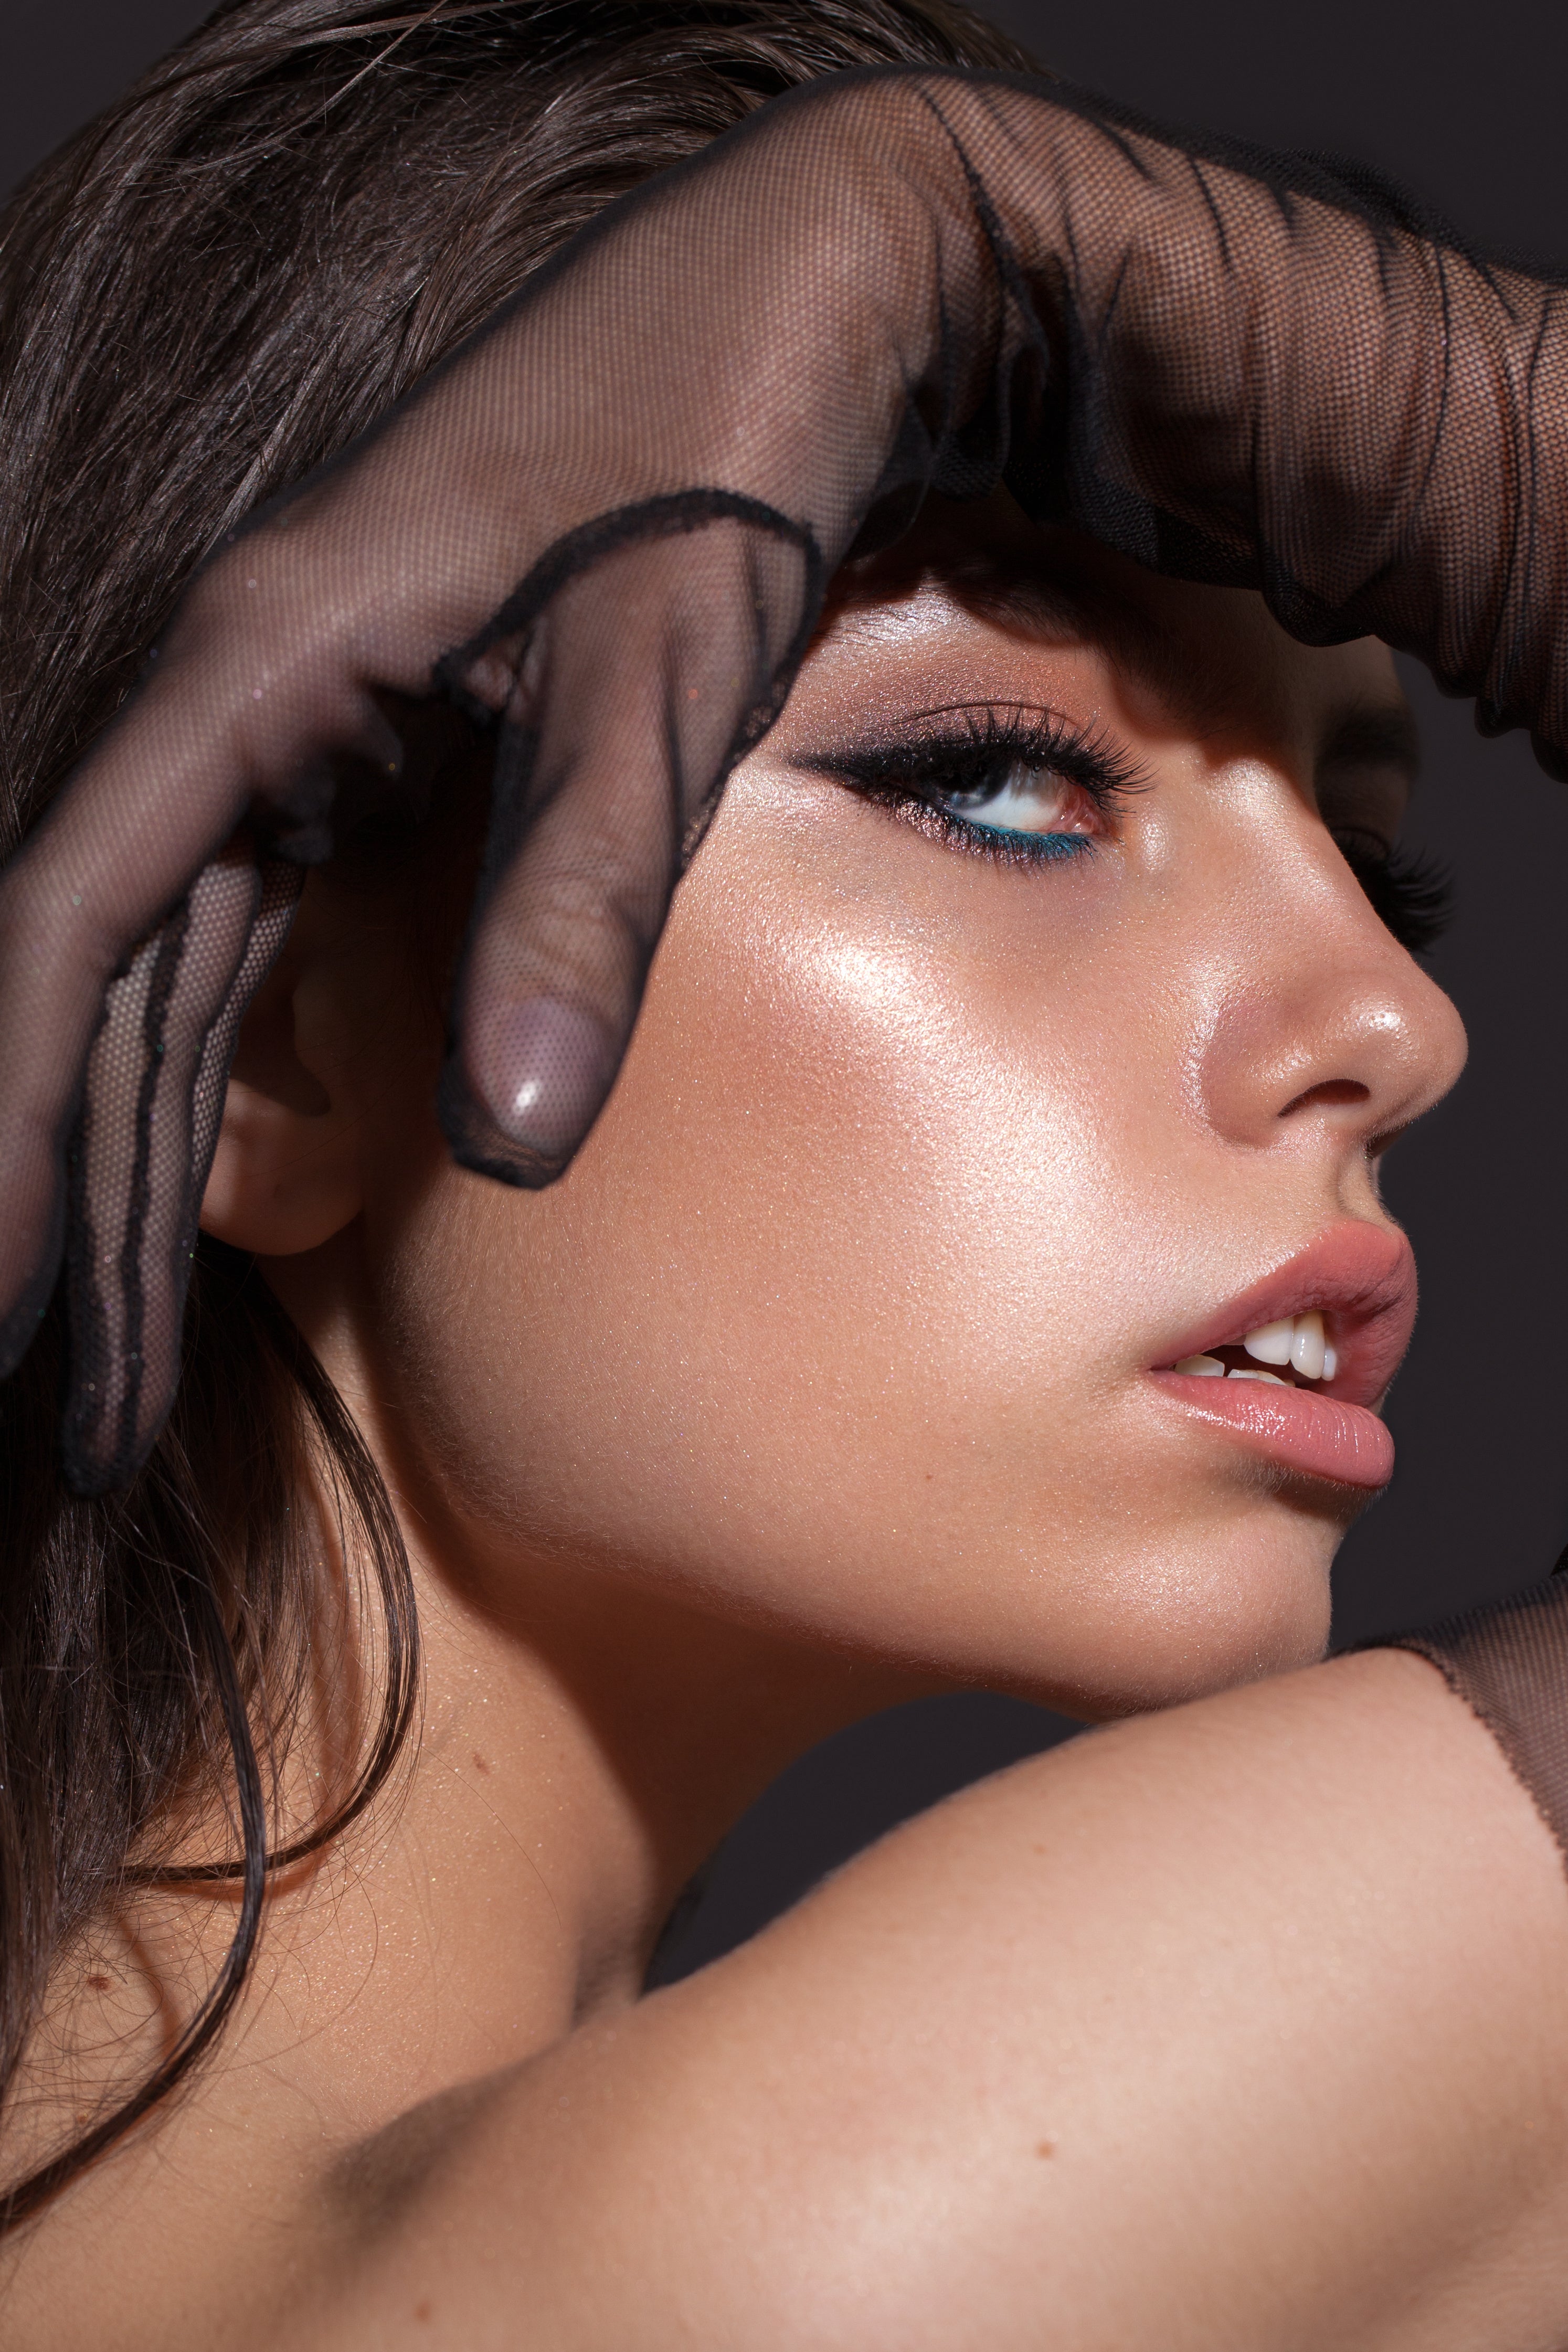 Close up of a model's face wearing blue and black liner and a glowy foundation.